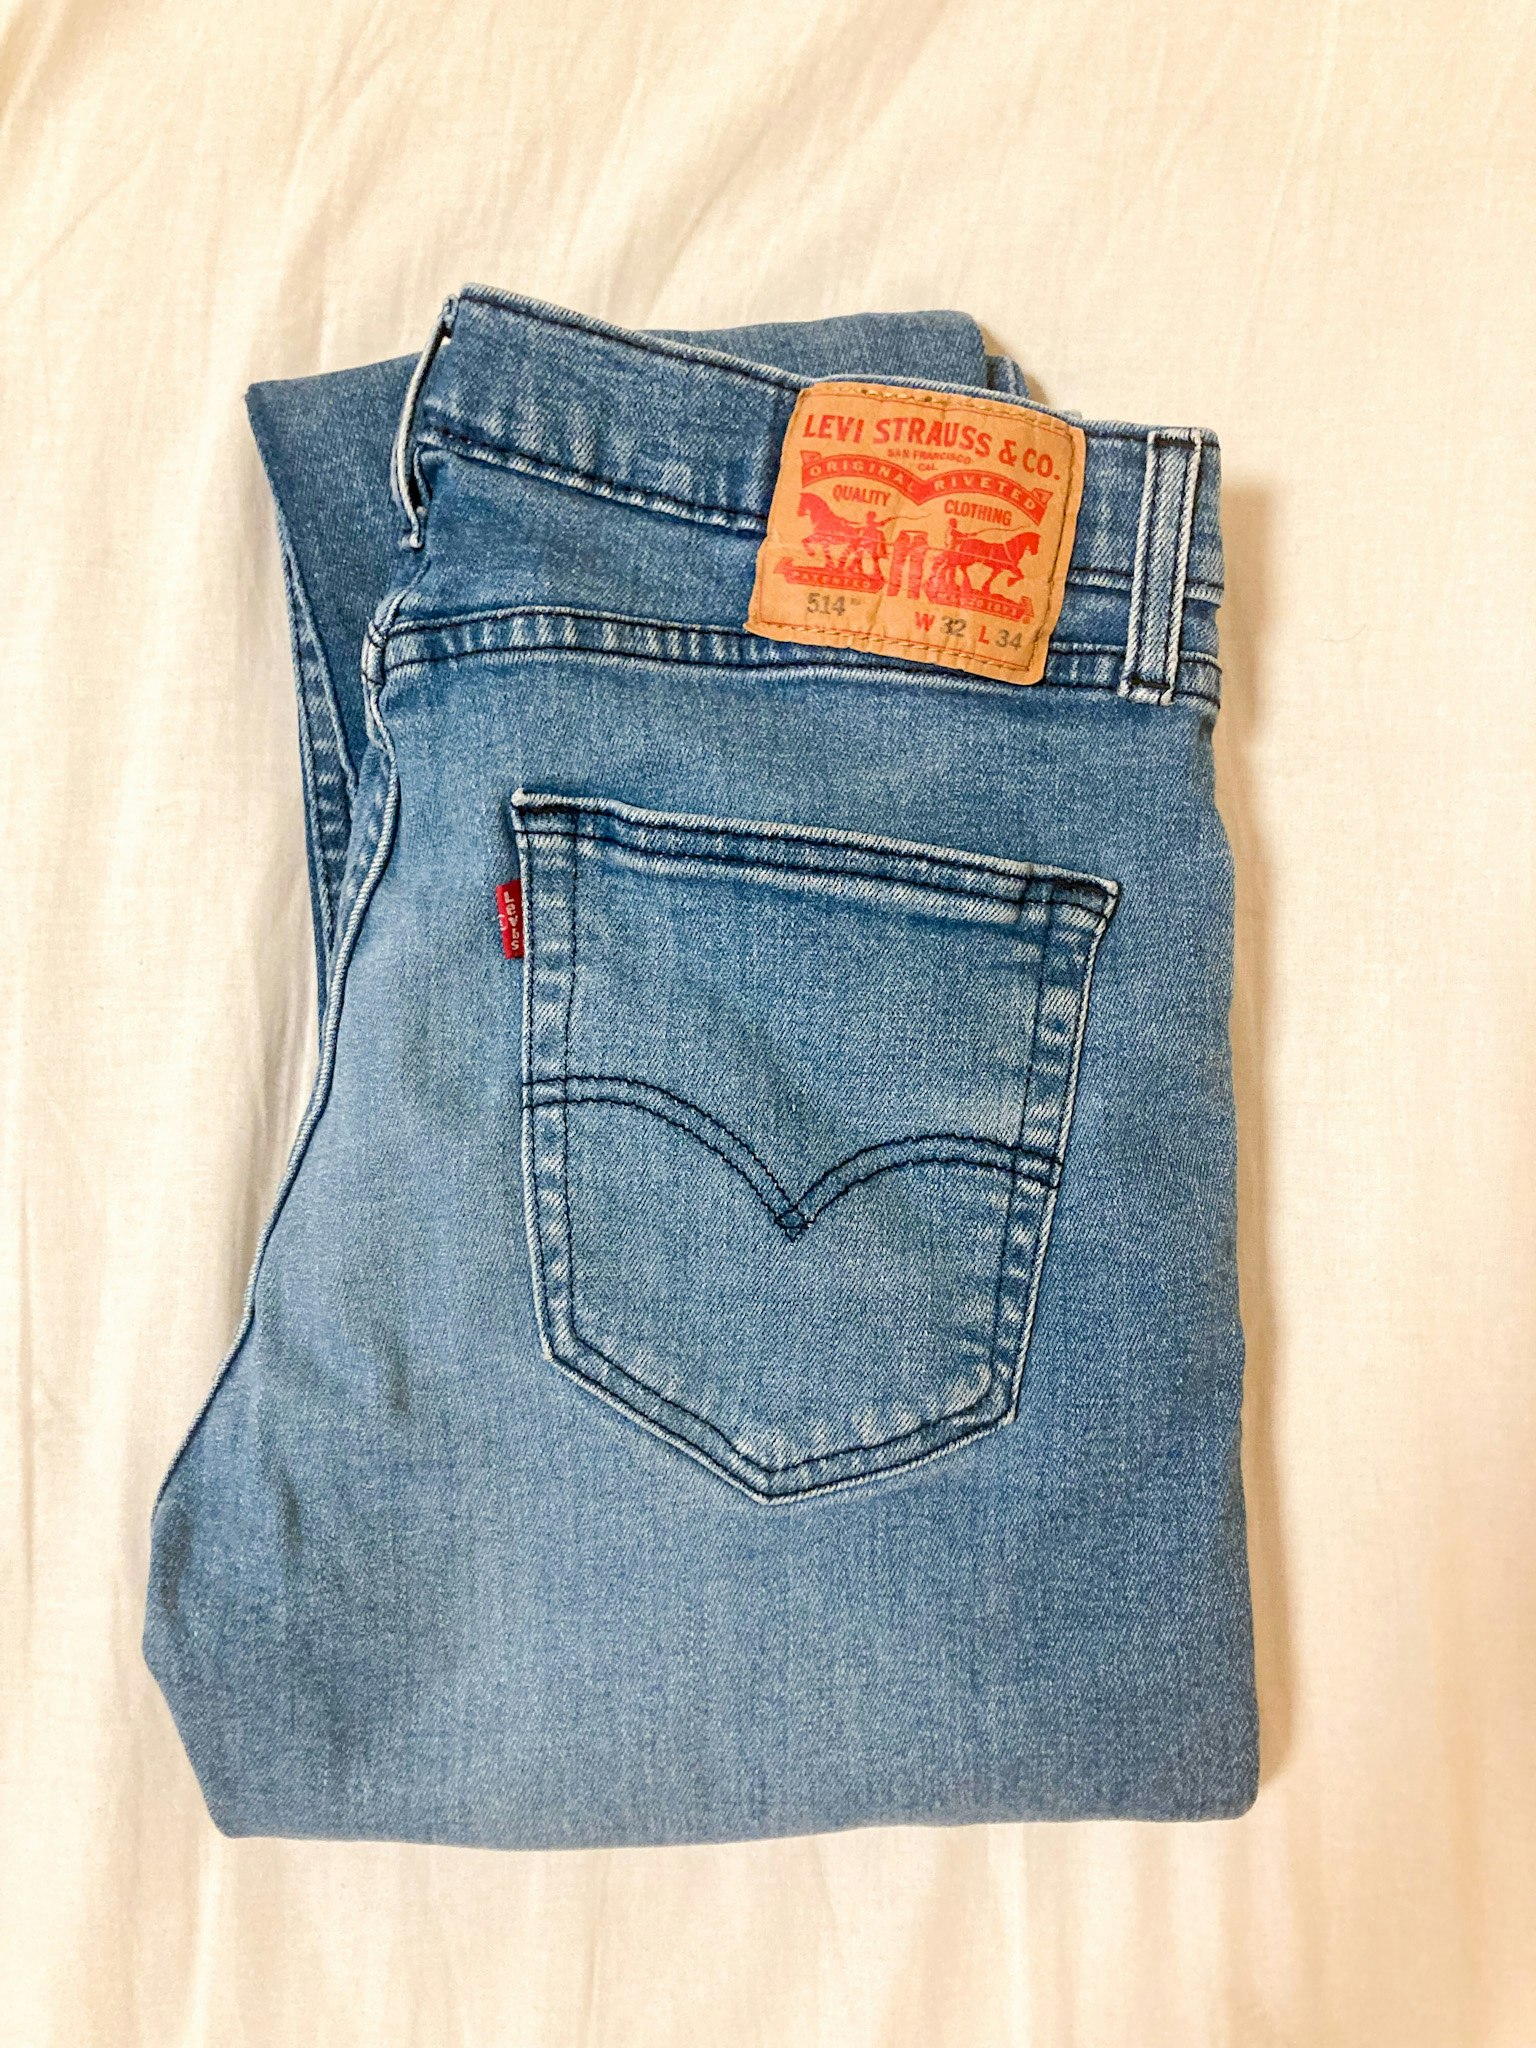 Levis 514 W32 L34 Top Sellers, SAVE 51% 